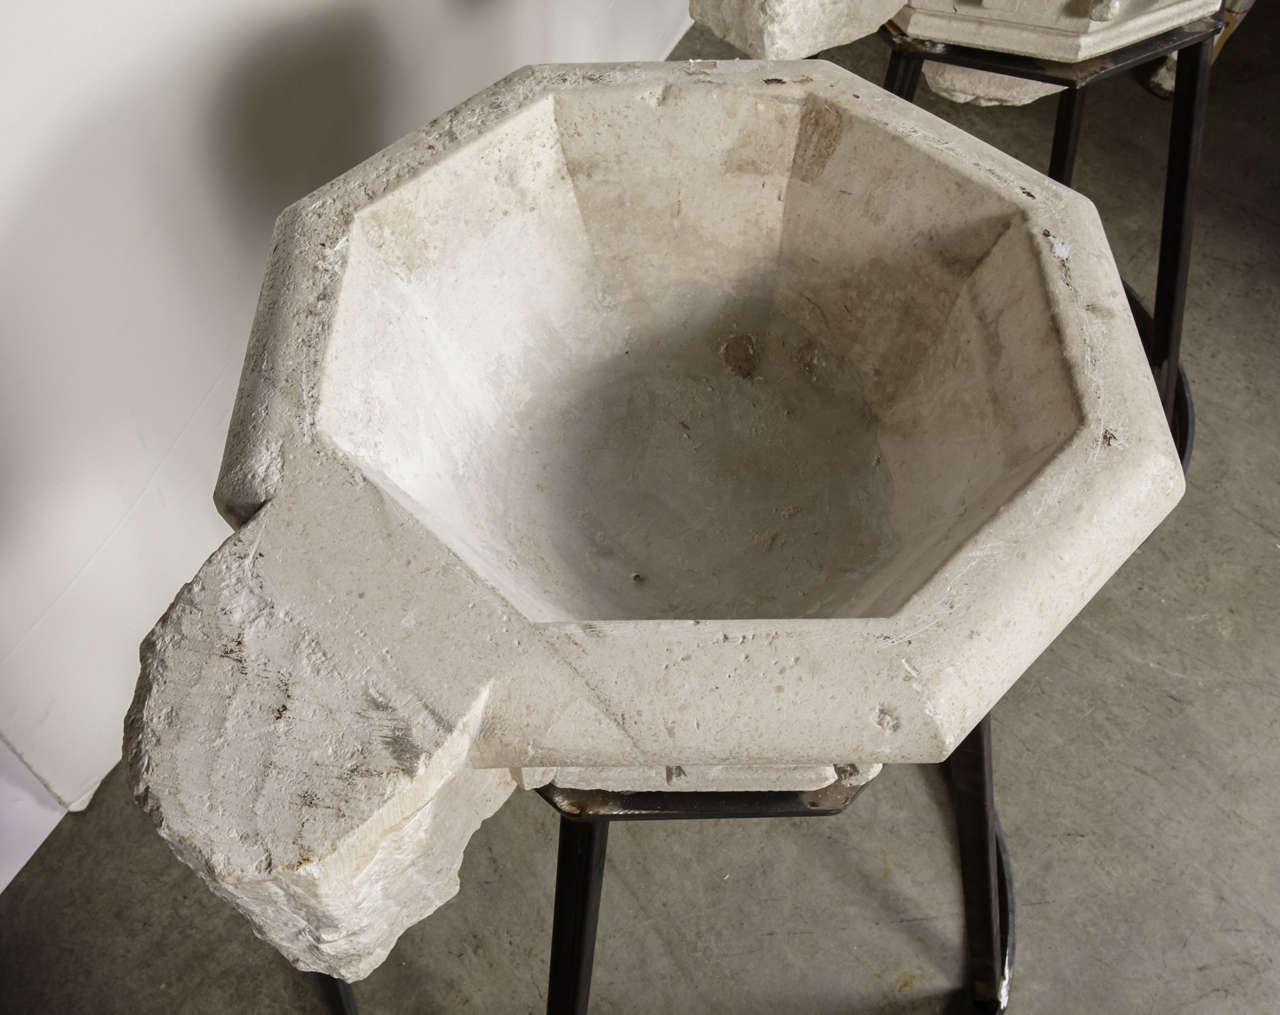 Pair of Antique Carved Stone Sinks (Stoups or Benitiers) from France, Circa 1830 In Good Condition For Sale In Dallas, TX